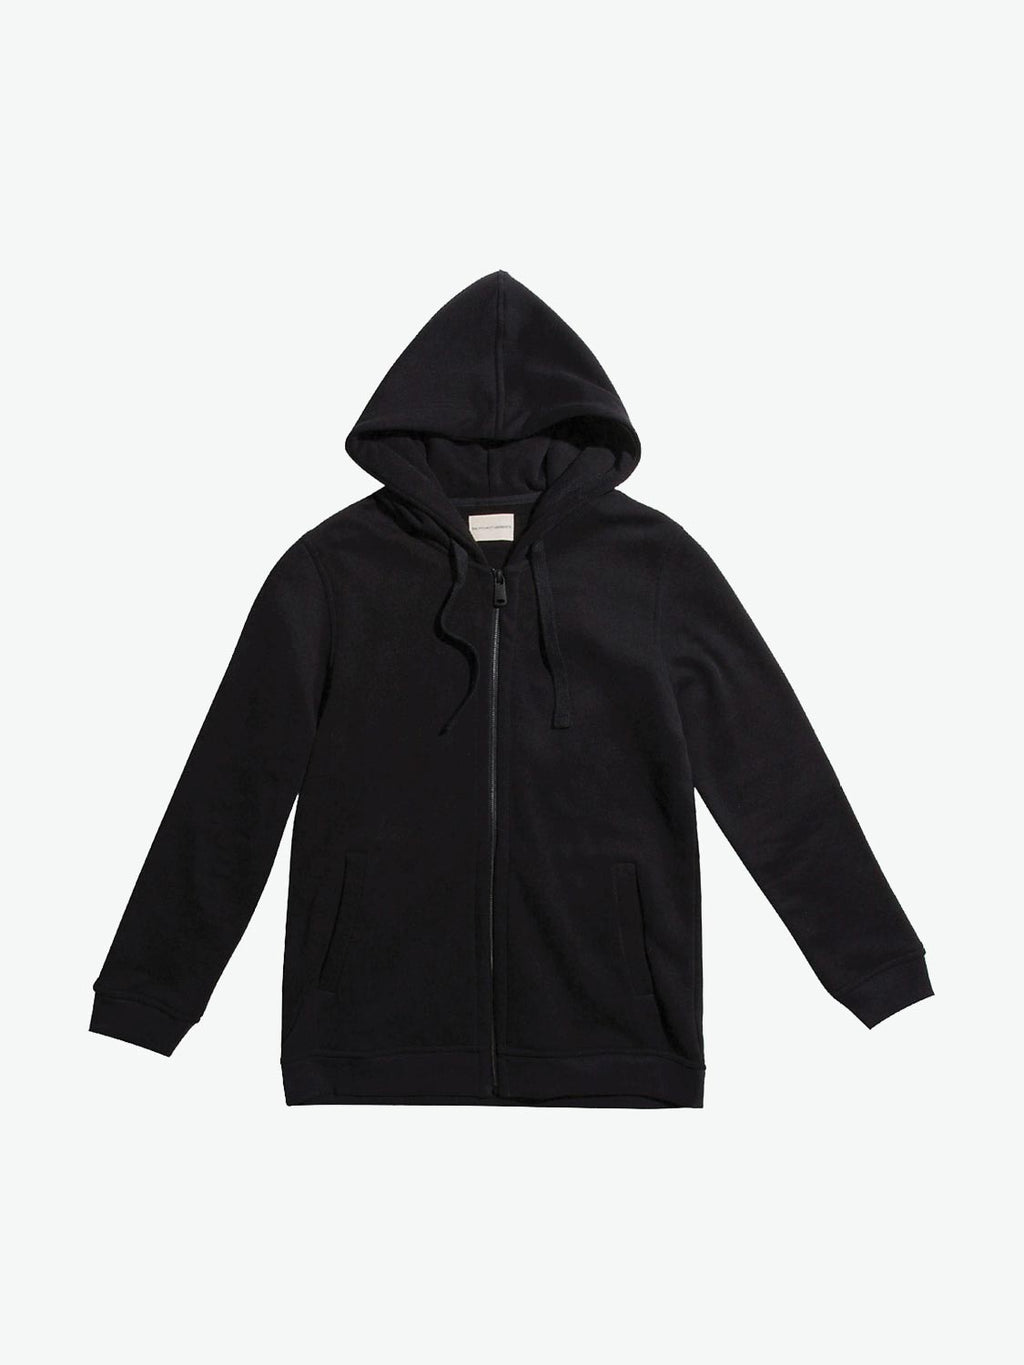 The Project Garments Organic Cotton Zip Up Hoodie Black